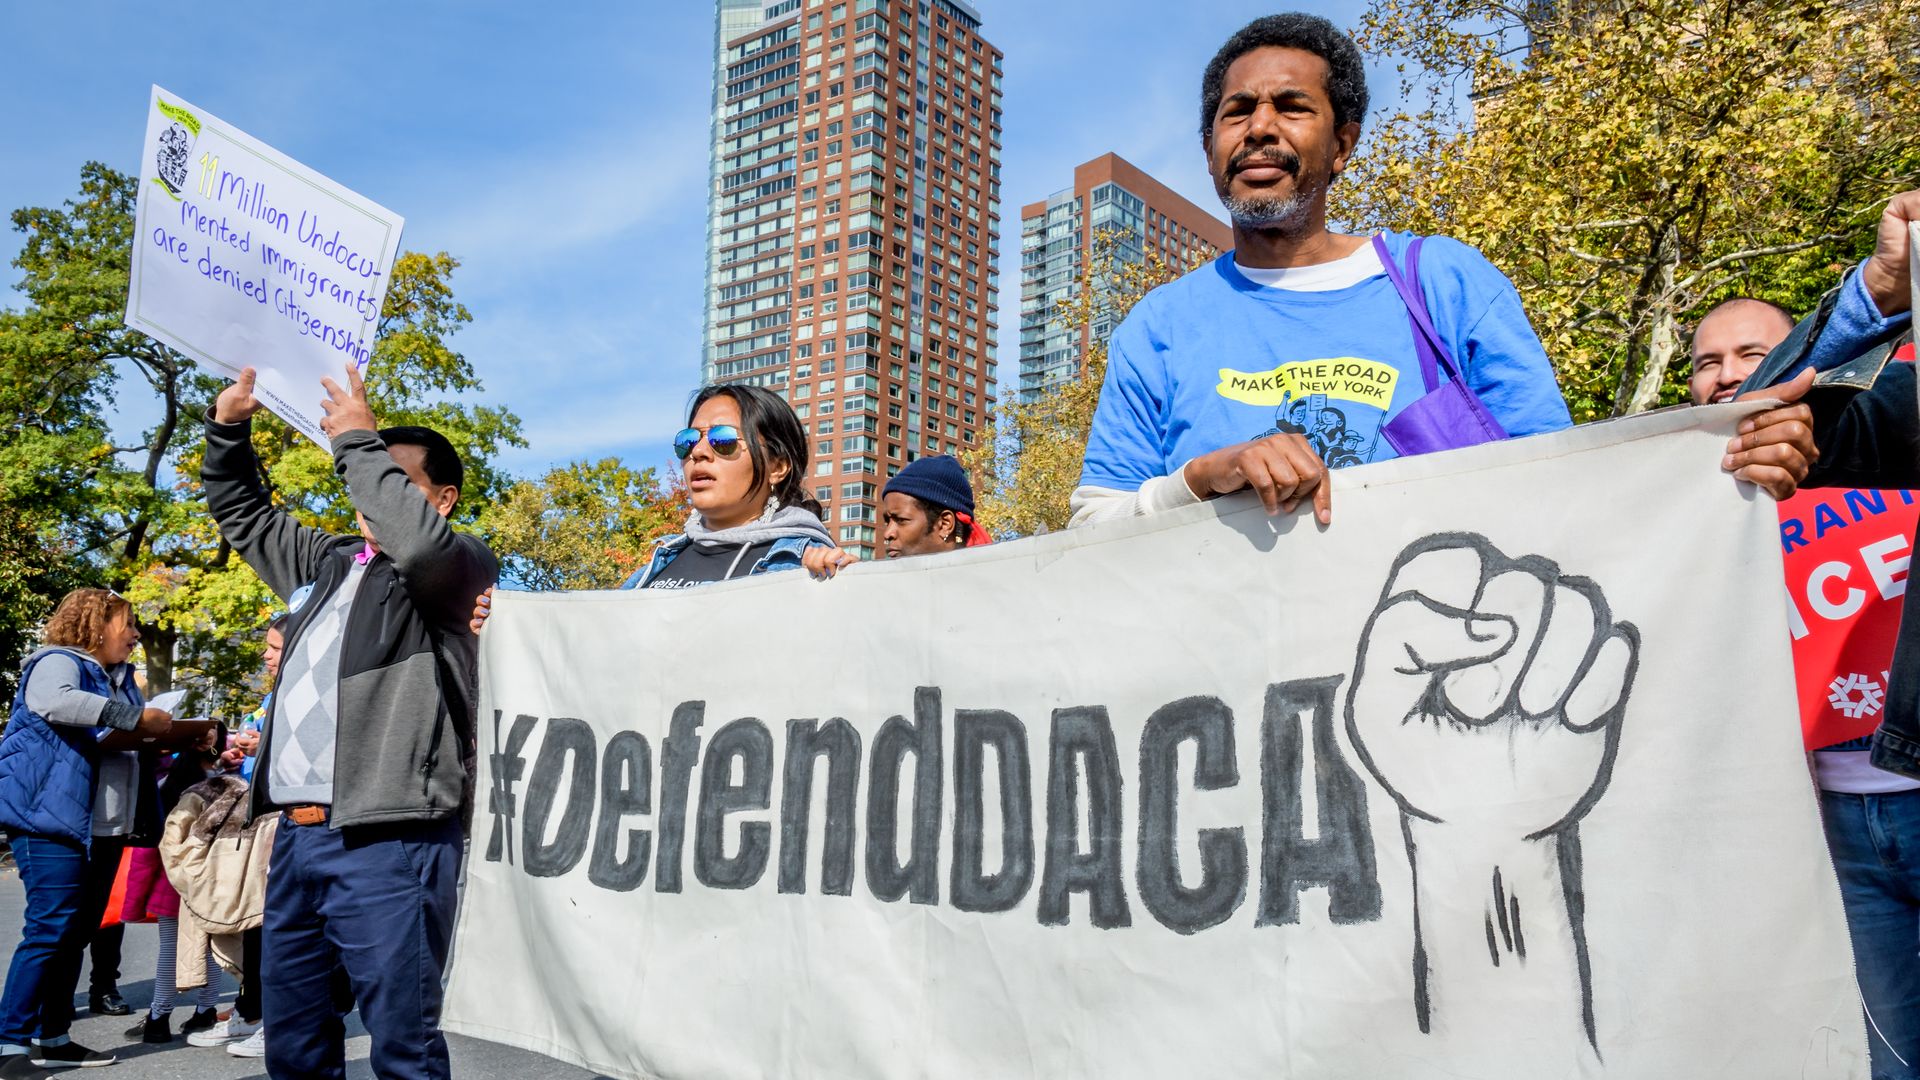 Protestors hold signs saying "Defend DACA"